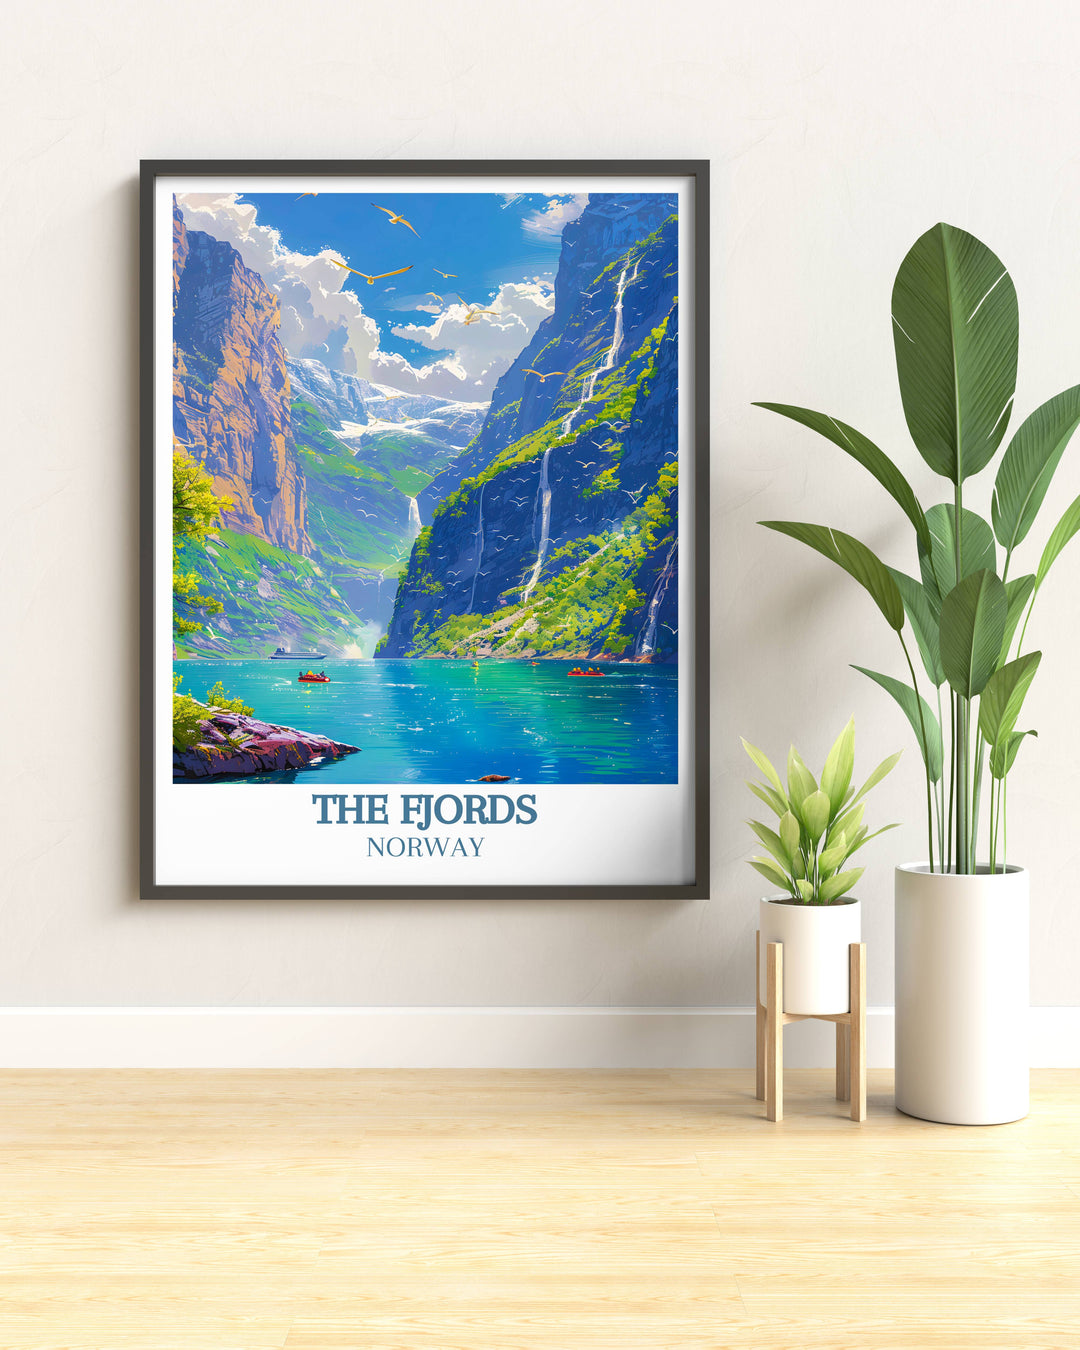 Norway Canvas Art featuring stunning views of the fjords and beyond, showcasing the diverse beauty of Norways natural landscapes, perfect for enhancing any home decor with a touch of natures grandeur.